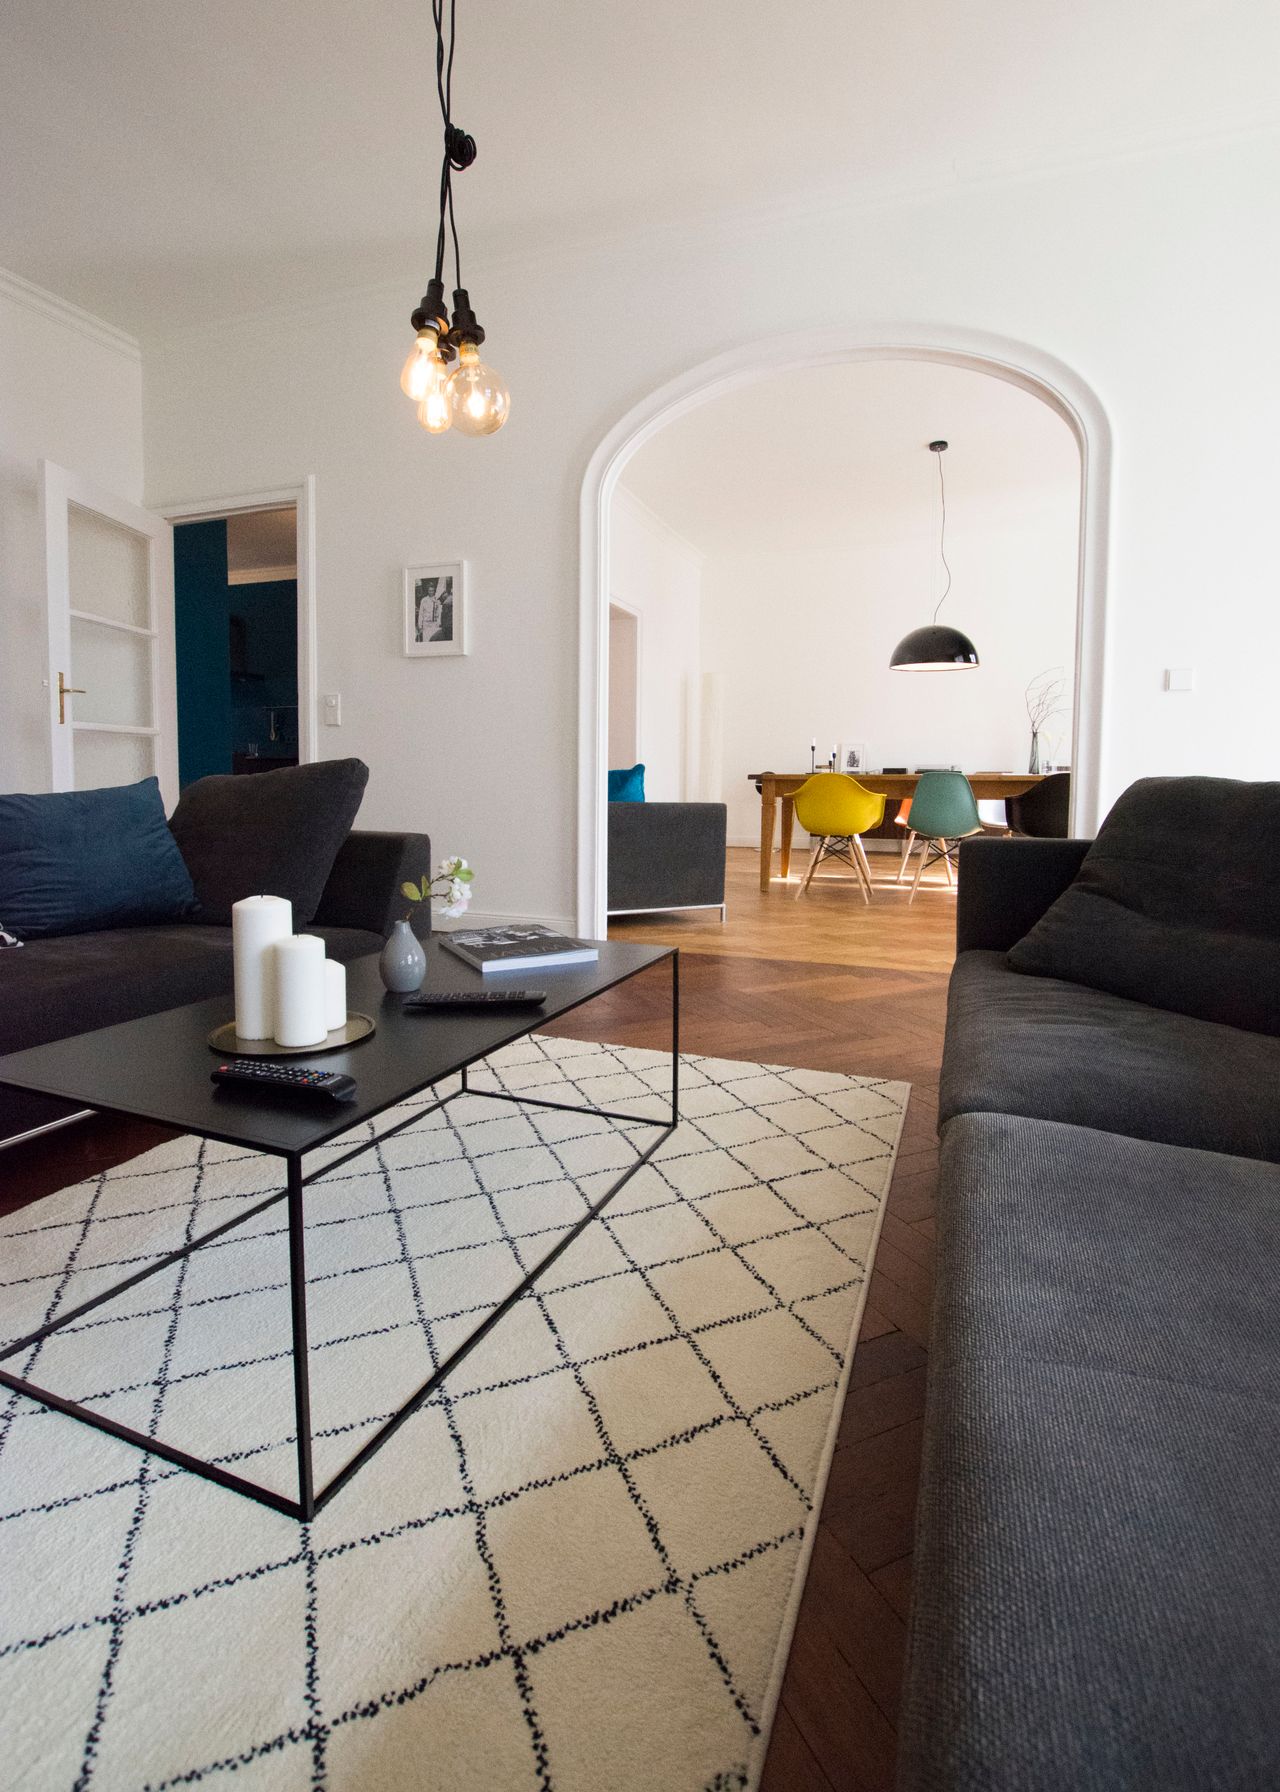 Beautiful, high quality furnished appartment with park view in Grunewald (Wilmersdorf).